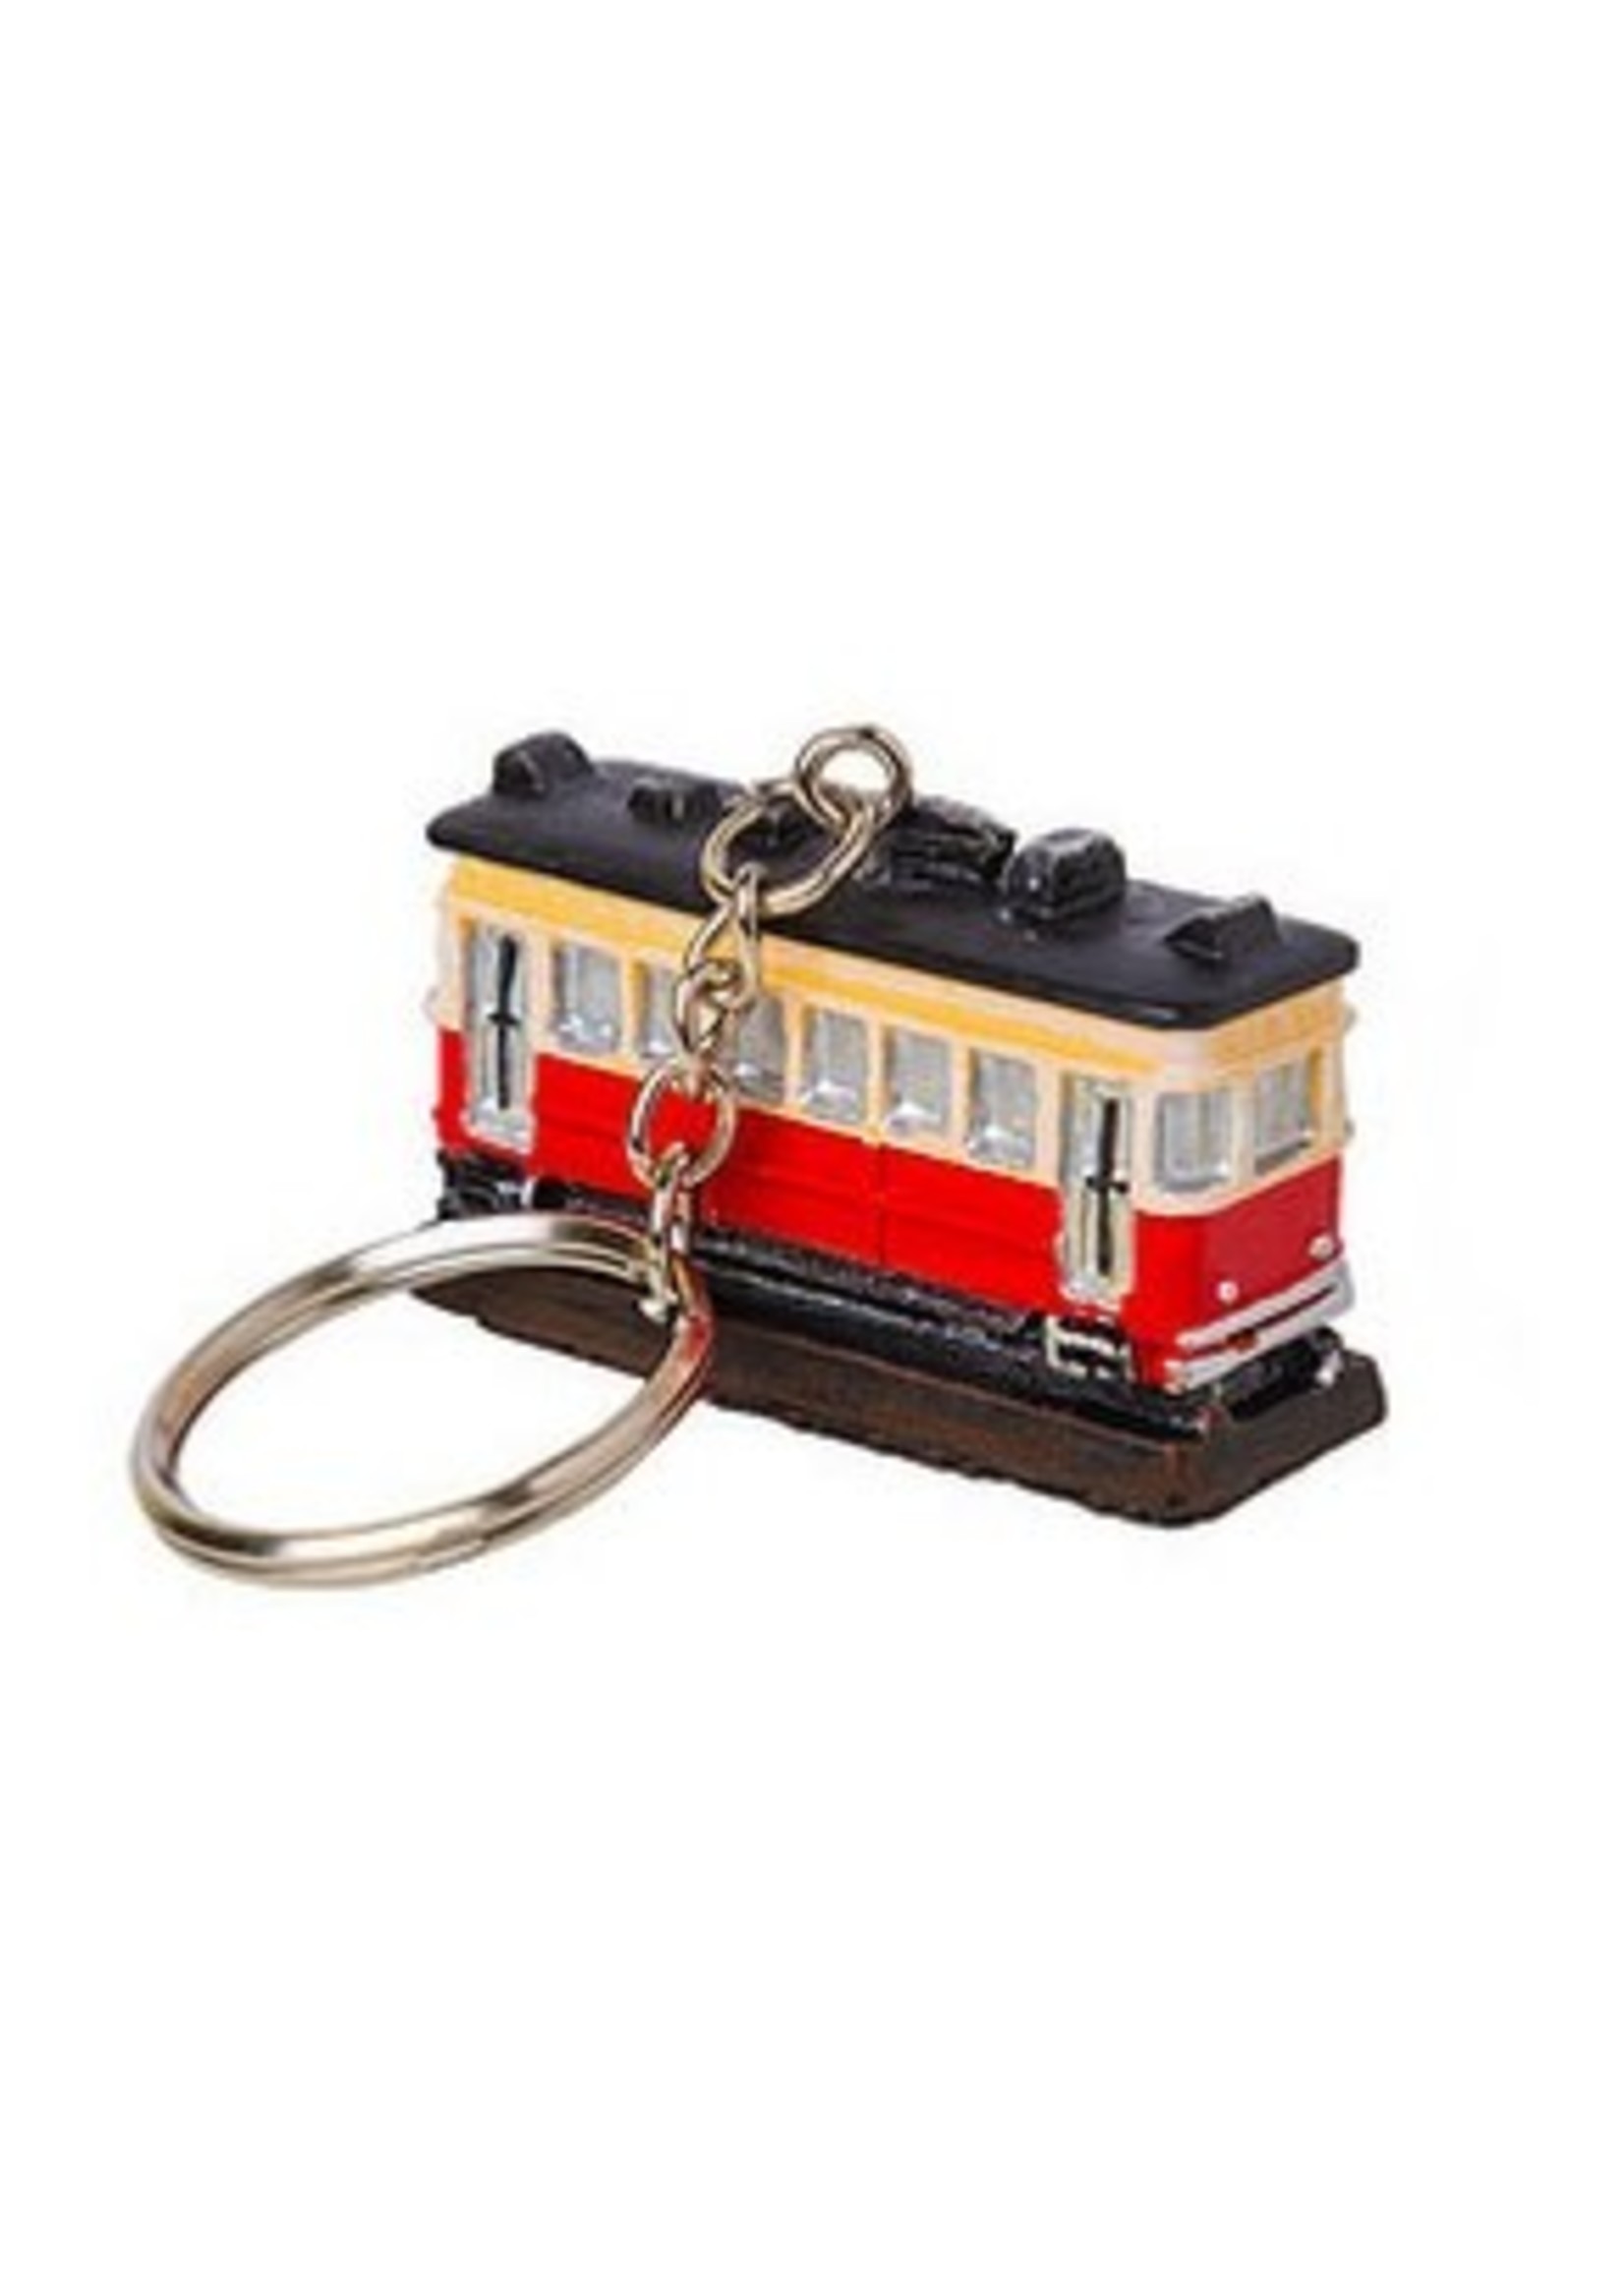 3T Rail Products Resin Trolley Keychain